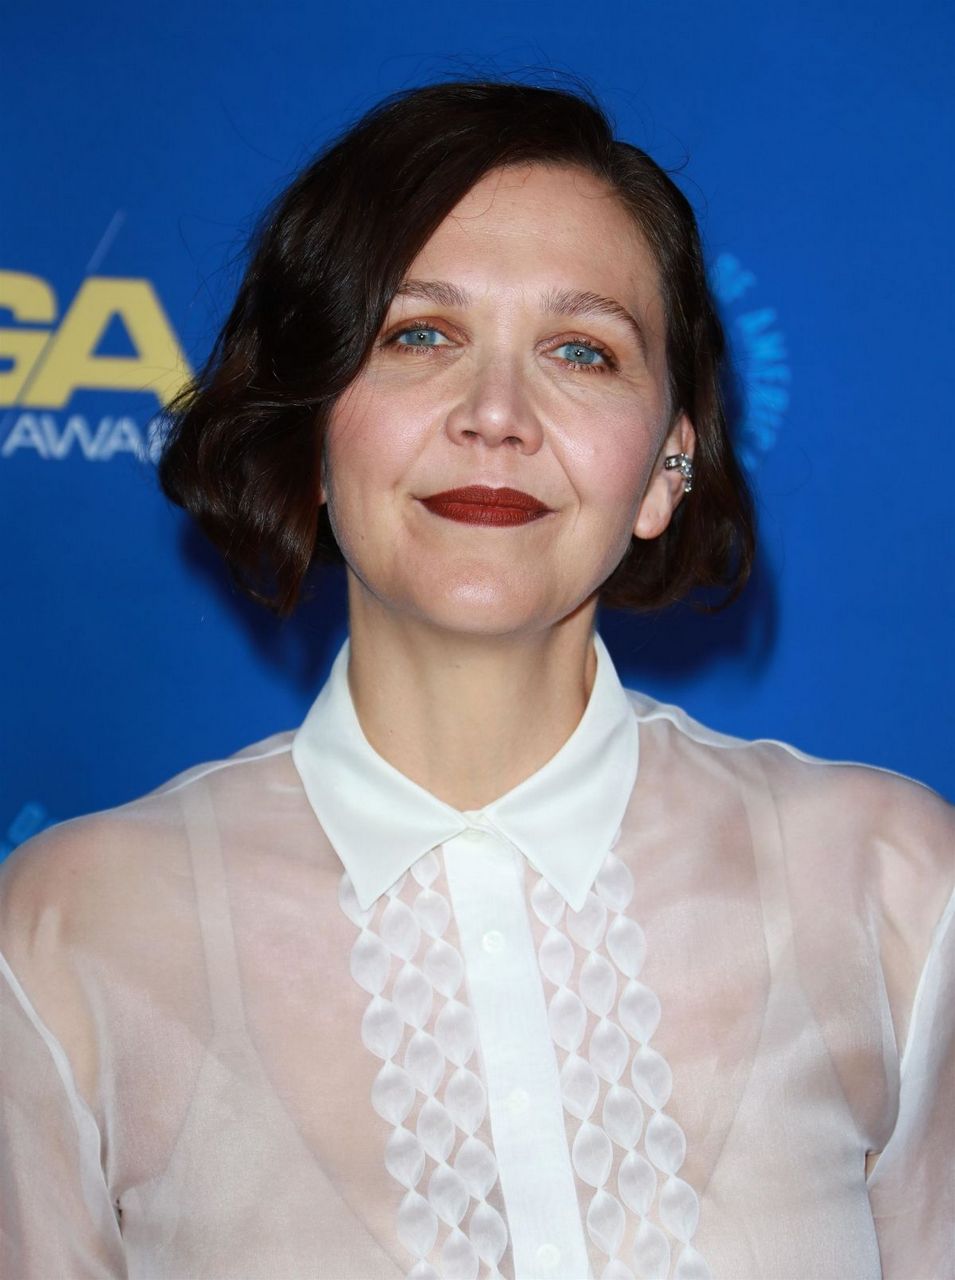 Maggie Gyllenhaal 74th Annual Dga Awards Beverly Hills